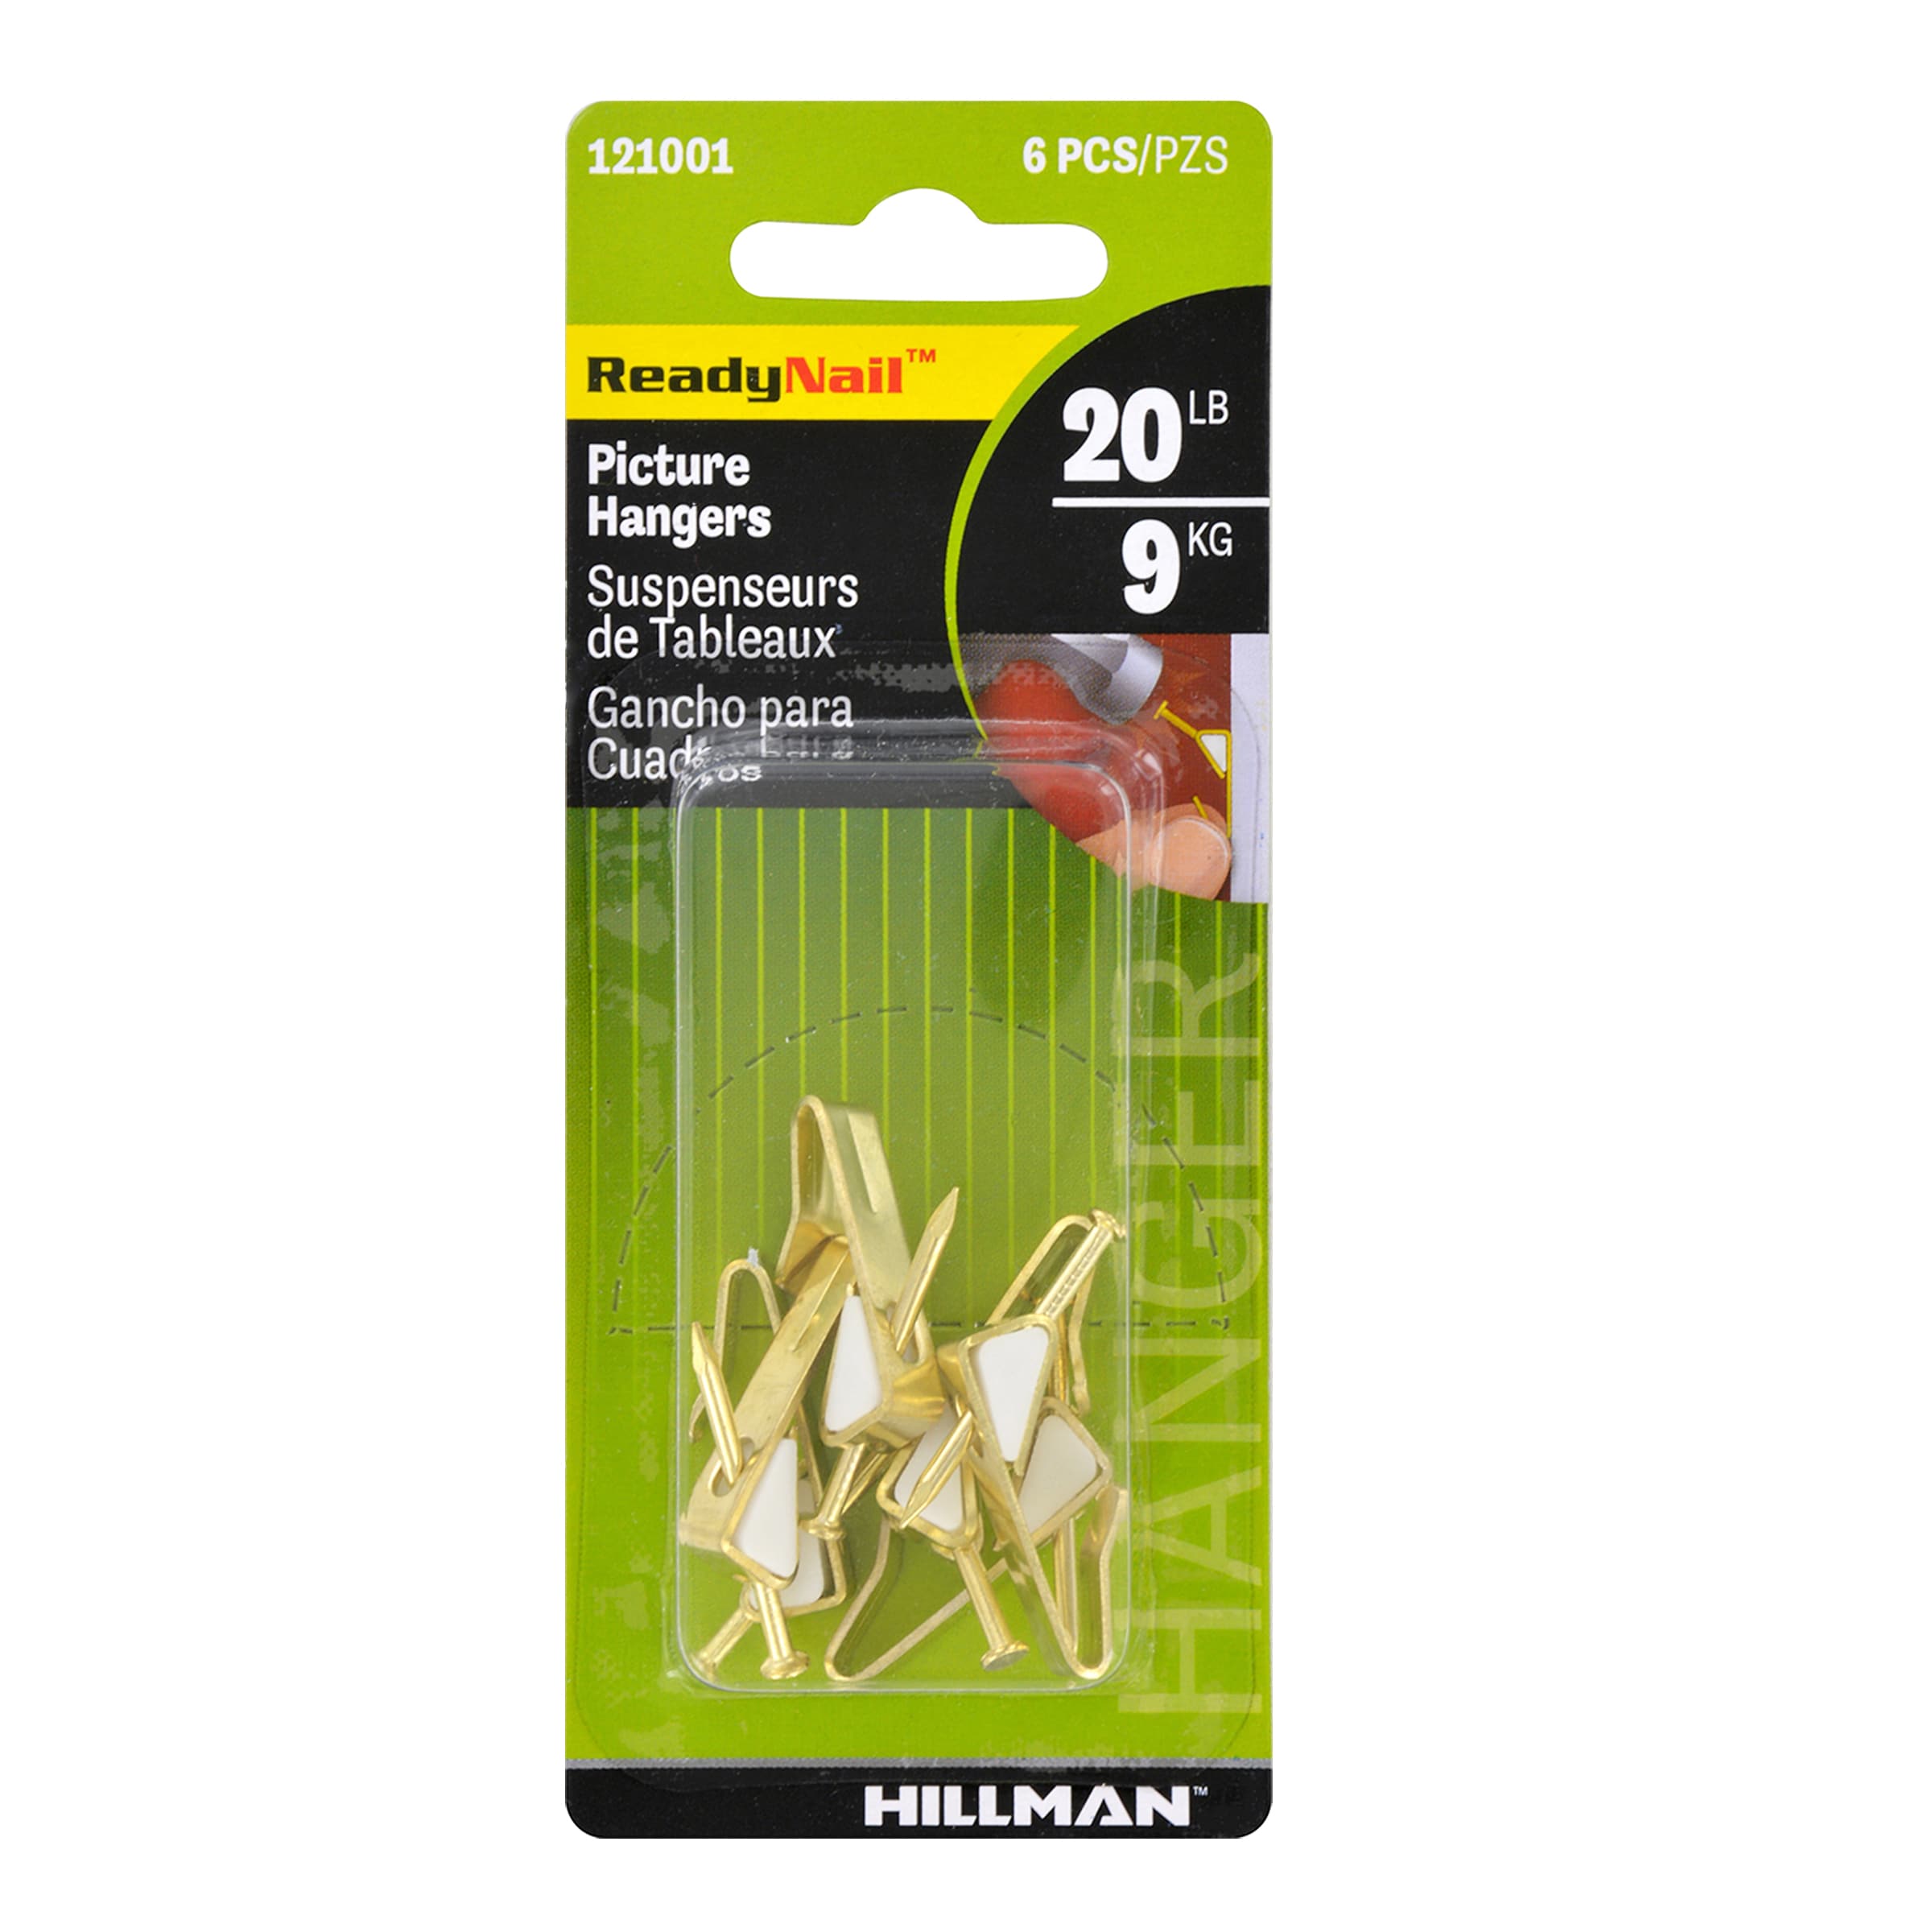 Hillman Pack of 2 55003 Ook Picture Hangers Shield 20 Pound Capacity 